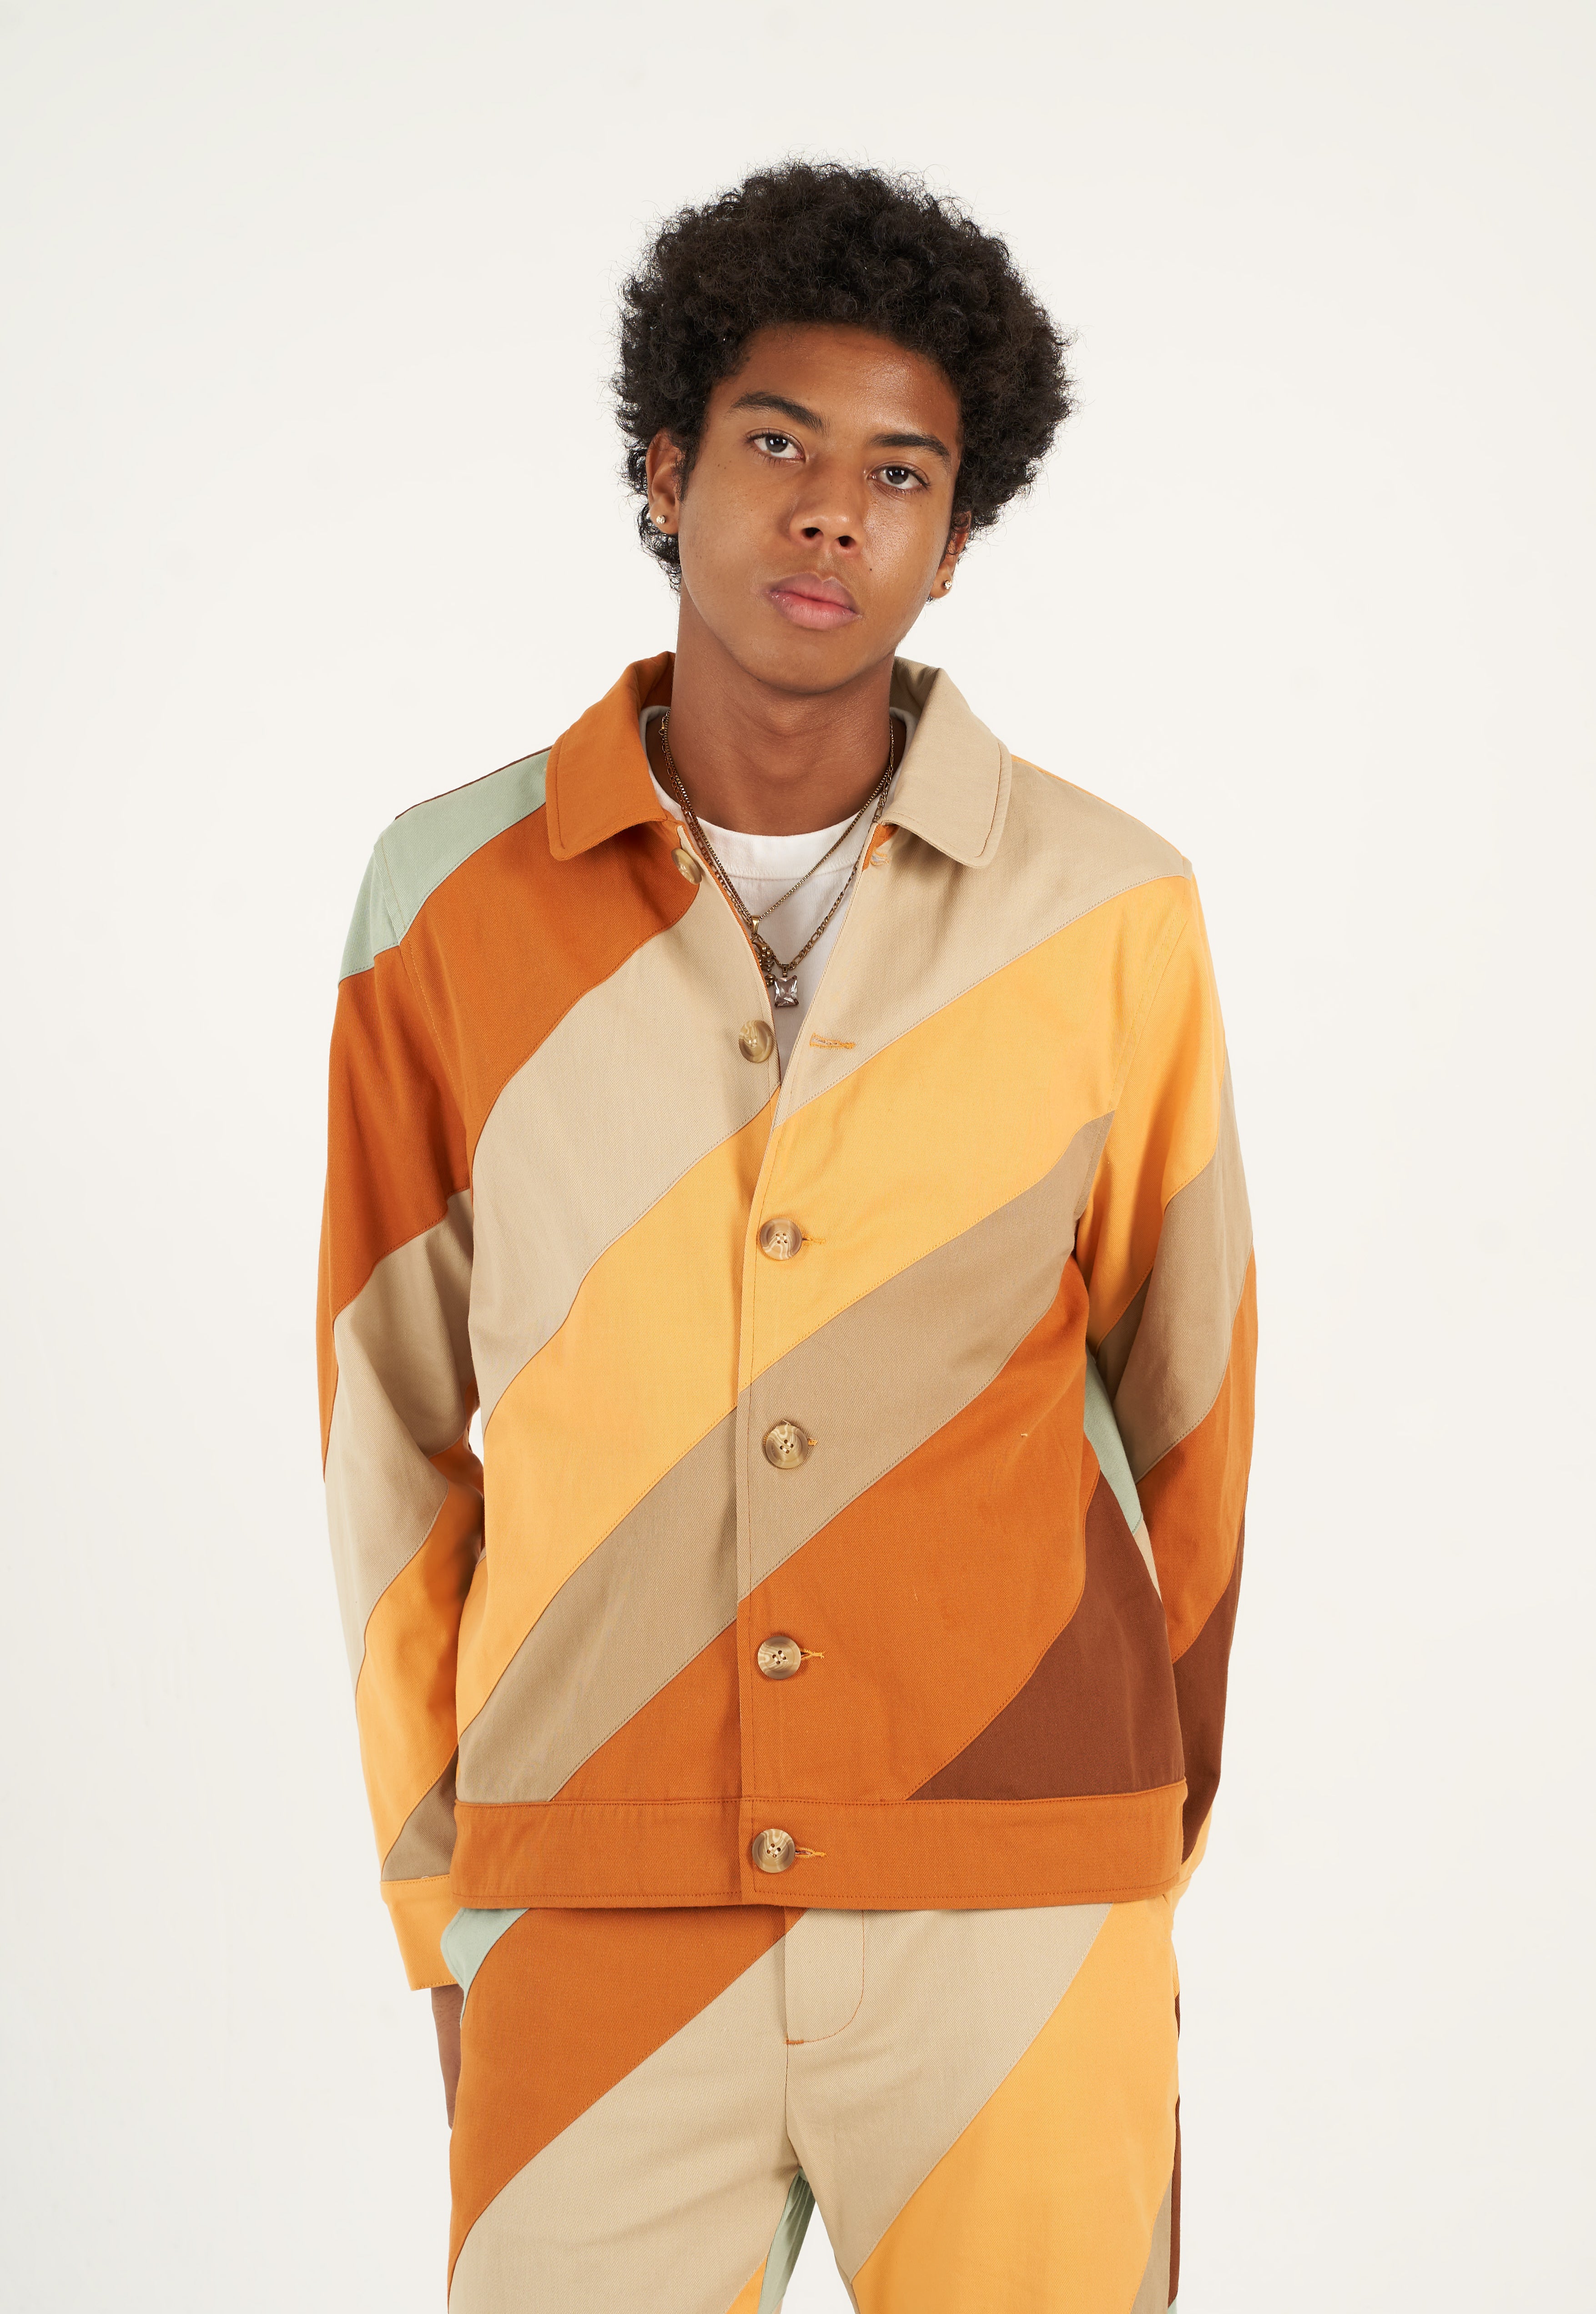 Bringing a touch of fall into your wardrobe, this cotton twill jacket is made using a durable cotton twill. Secured with bone buttons, it has two slit pockets on the sides to storage your everyday essentials. Pair it with our   Diagonal Striped Patchwork Pants to complete your fall and winter look.